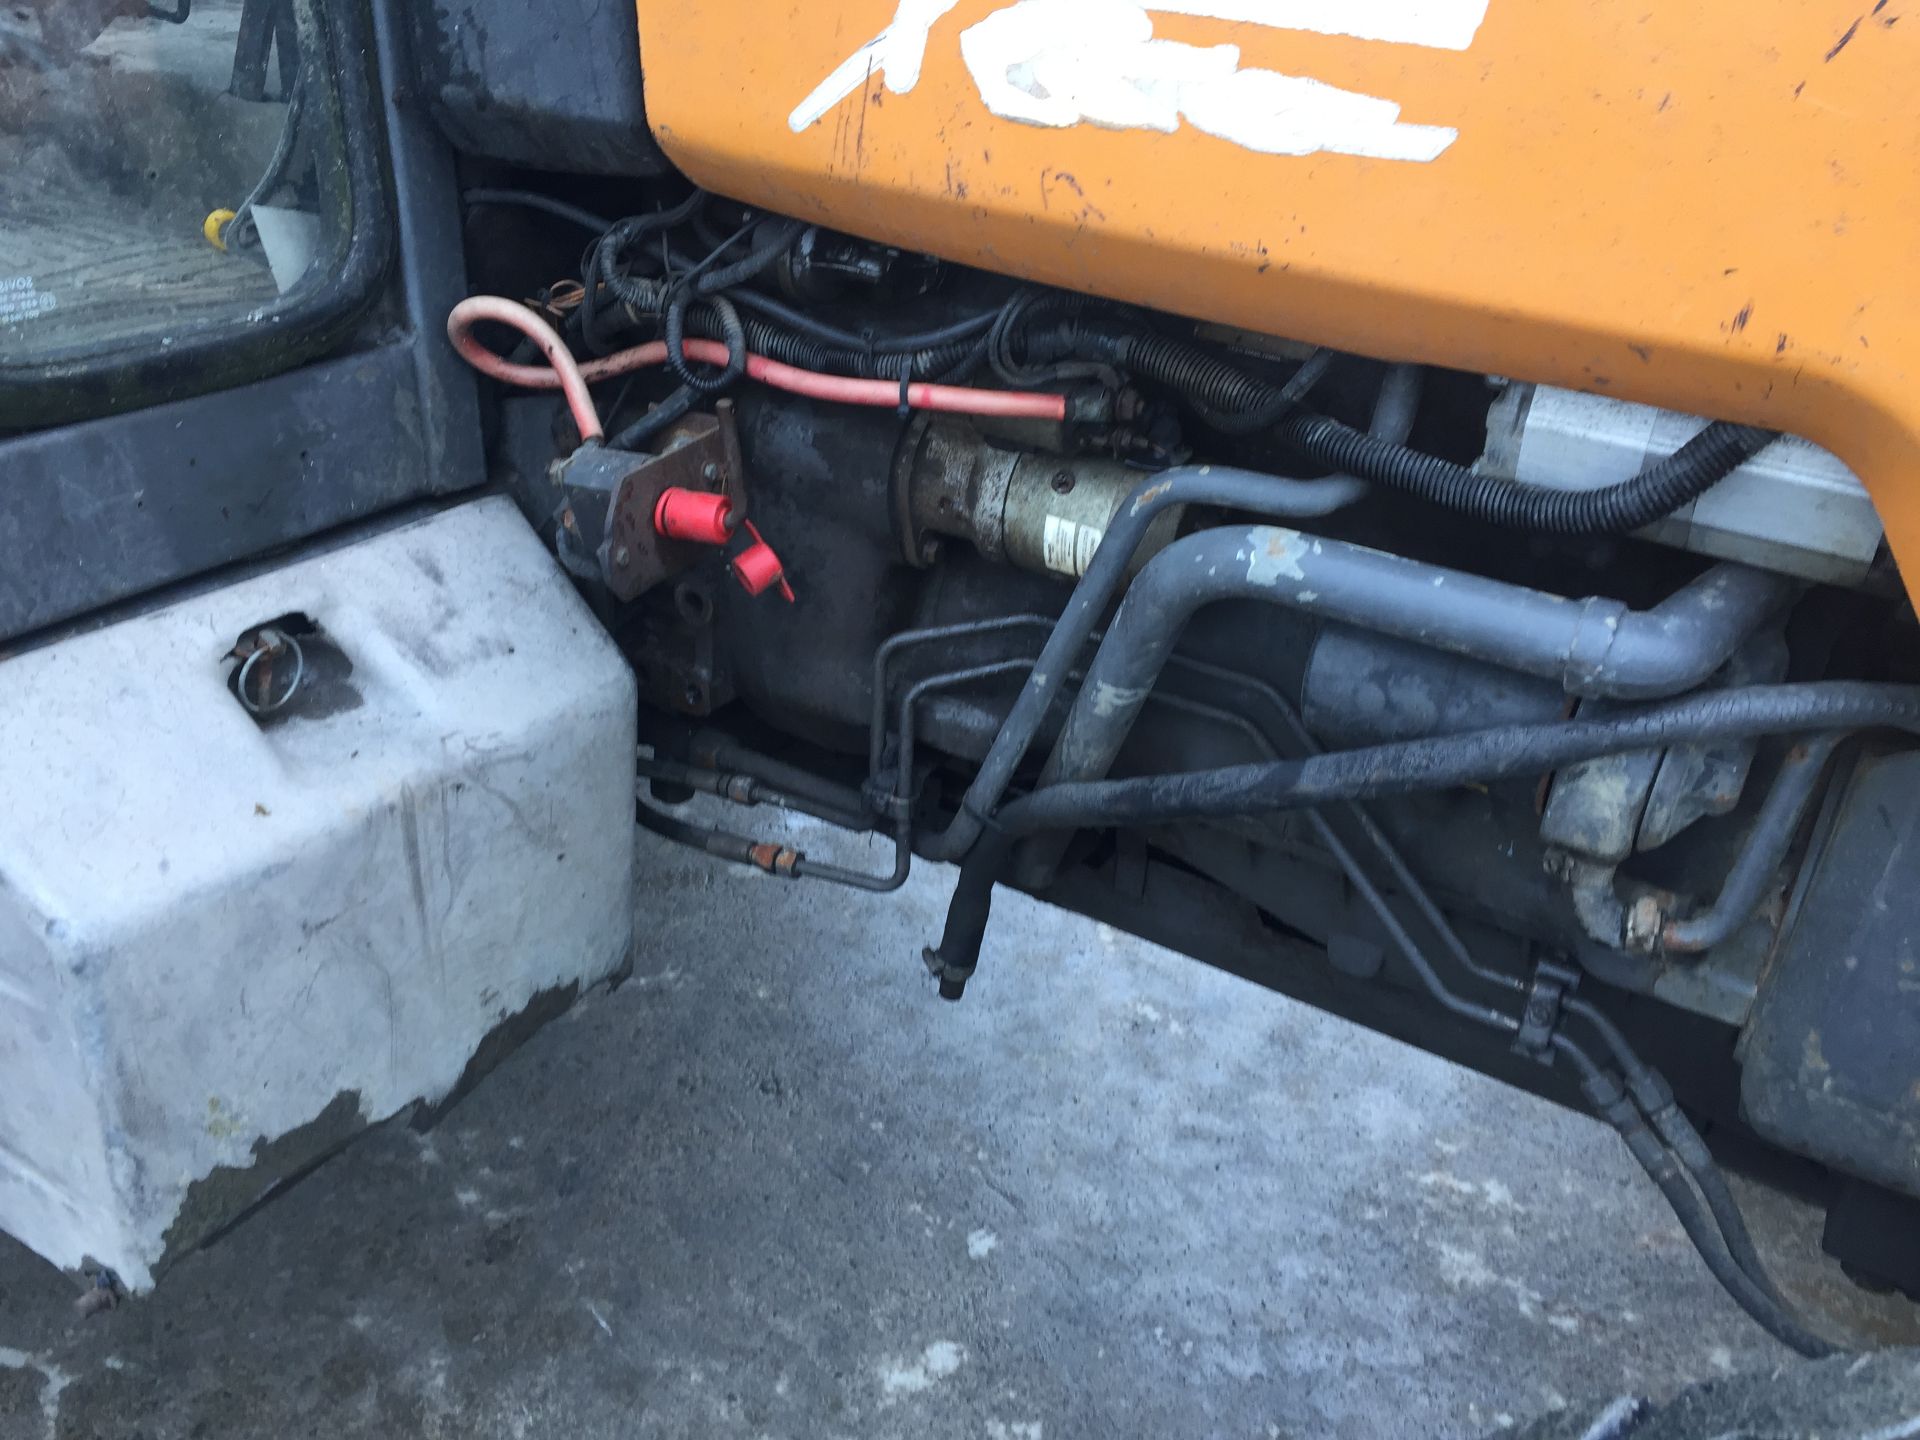 95CE3594 1995 Renault Ceres 95 4WD Tractor - Image 21 of 23